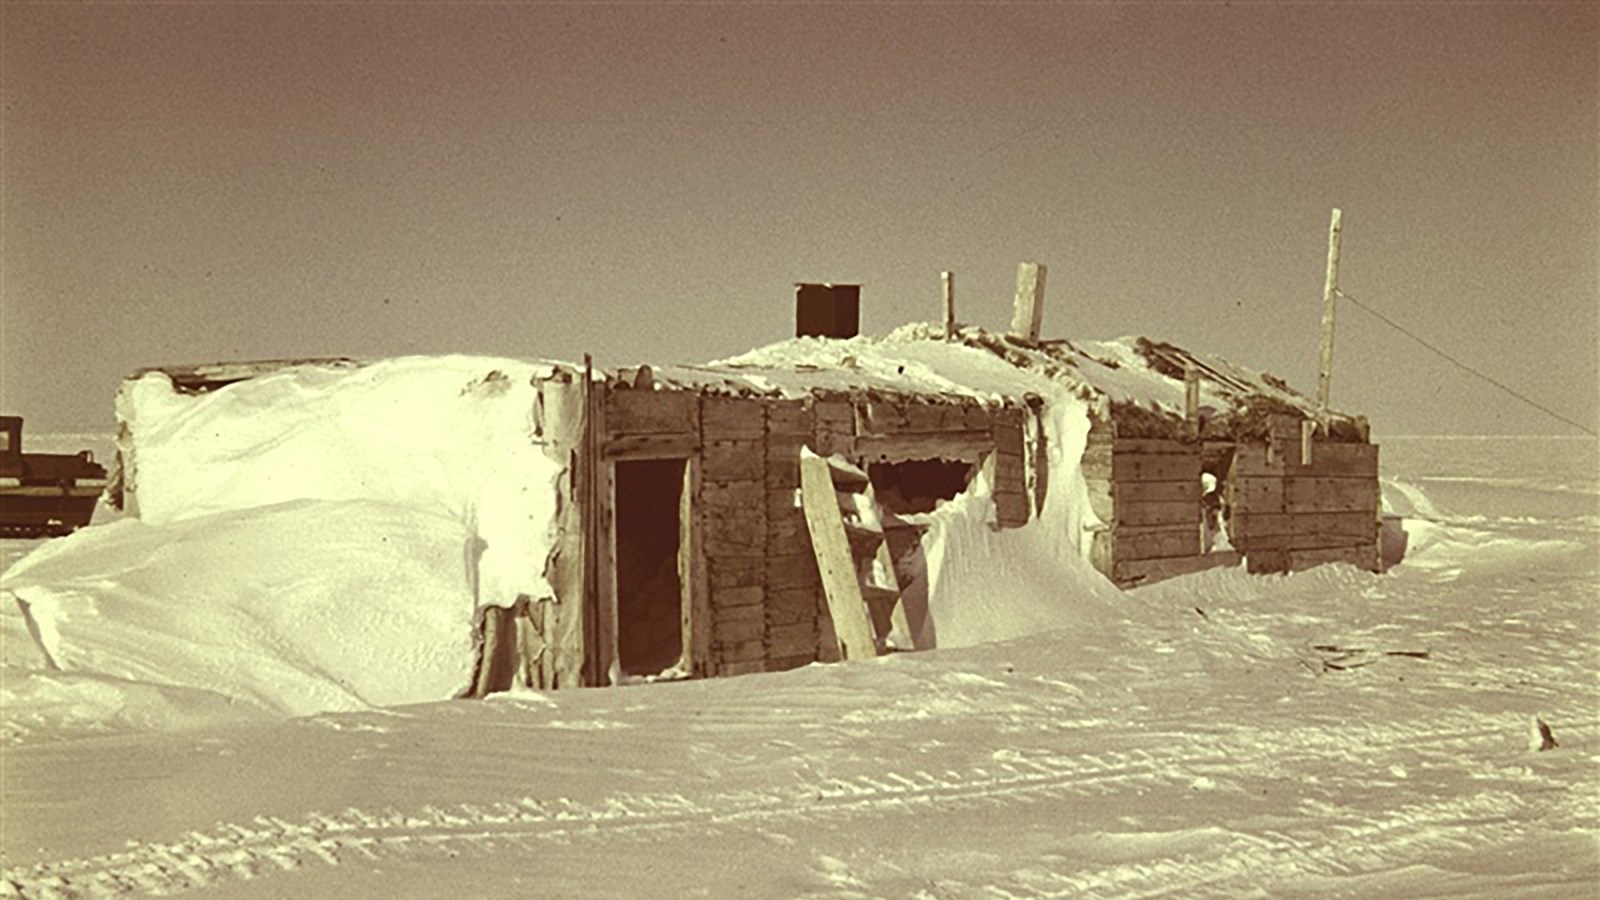 Historic photo of research cabins on a snowy landscape.